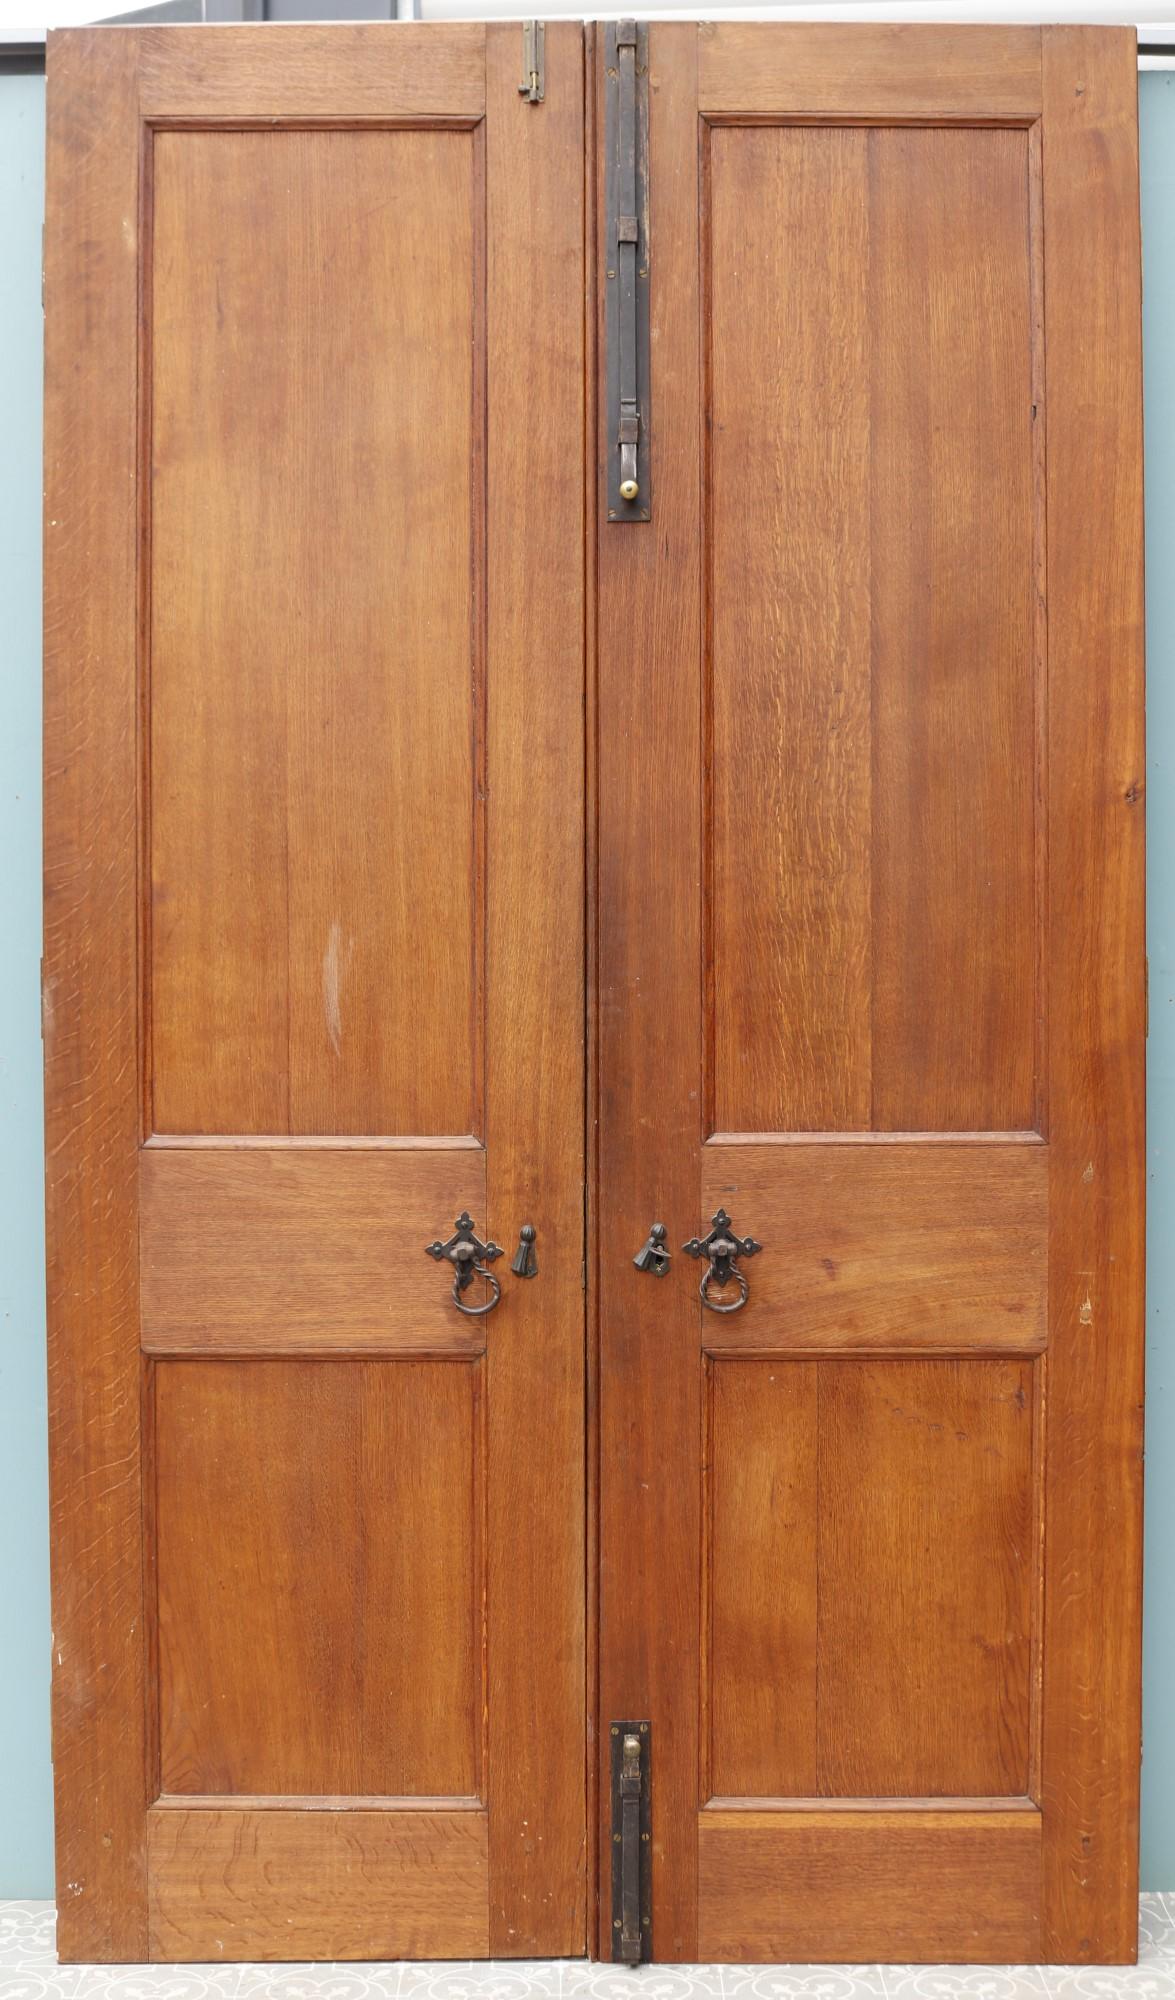 A set of antique double doors constructed from oak with raised and fielded panels.